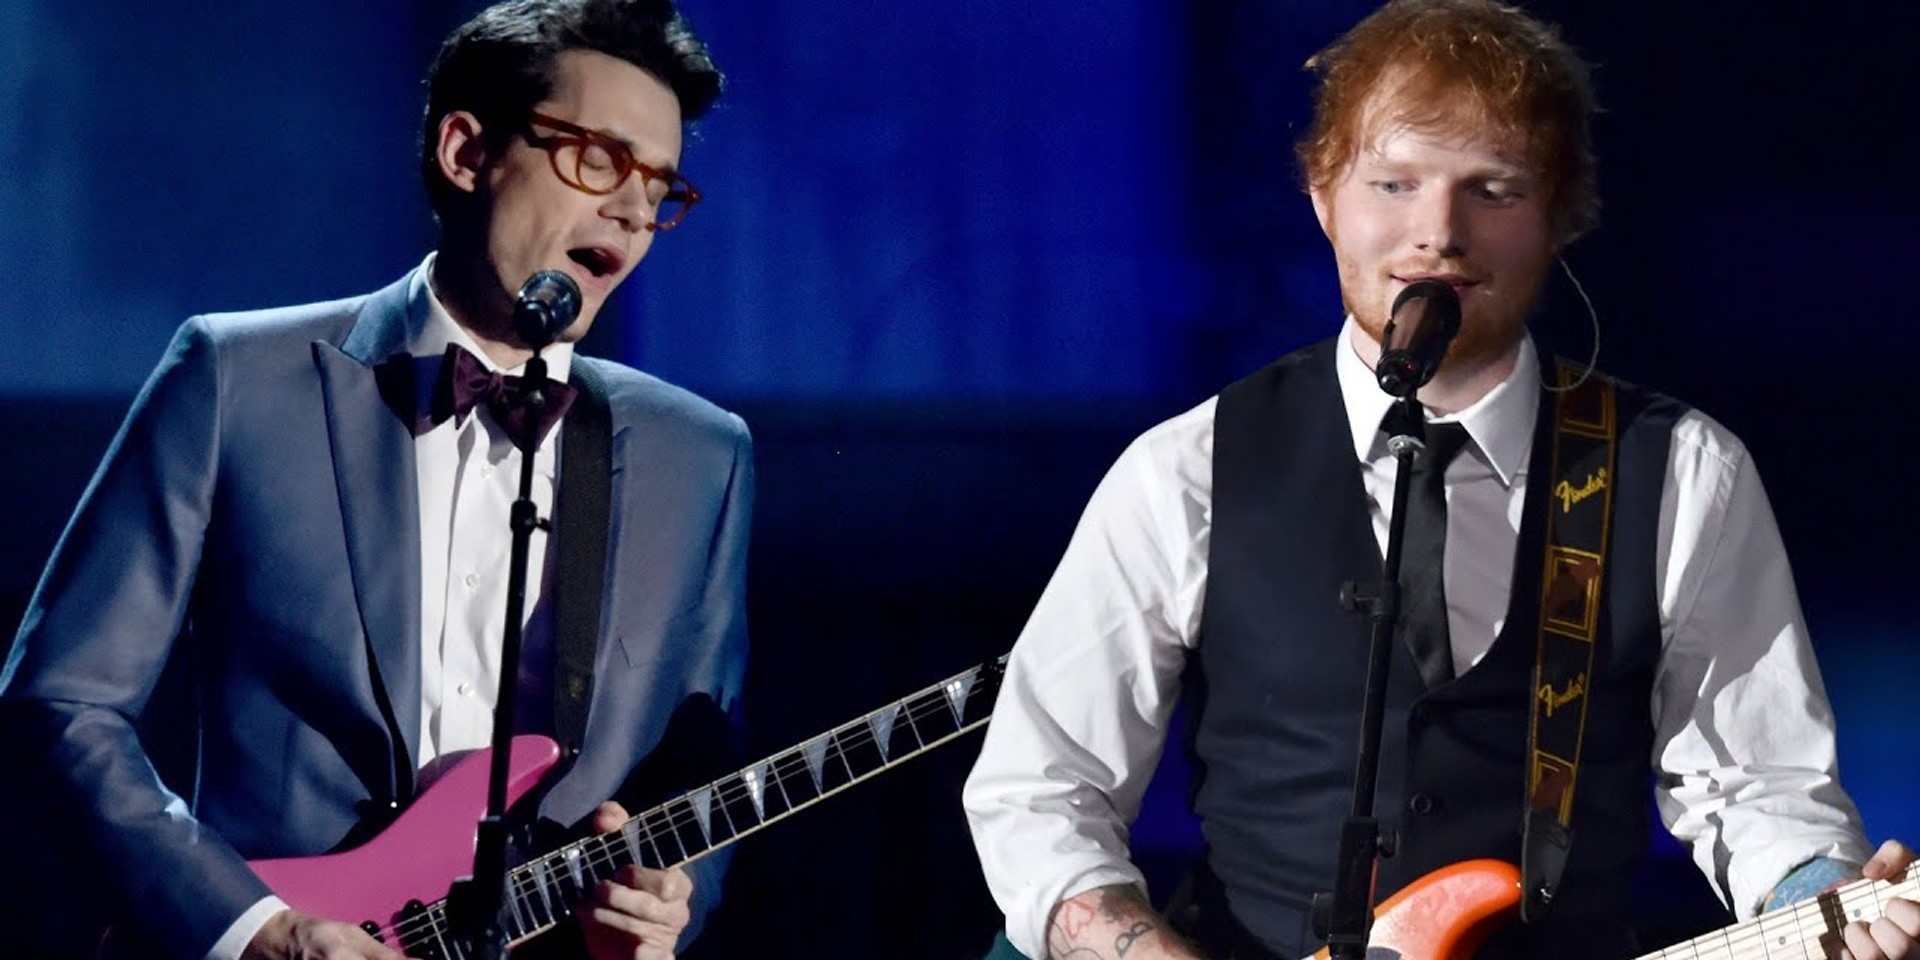 John Mayer brings Ed Sheeran out as special guest during Tokyo concert – watch